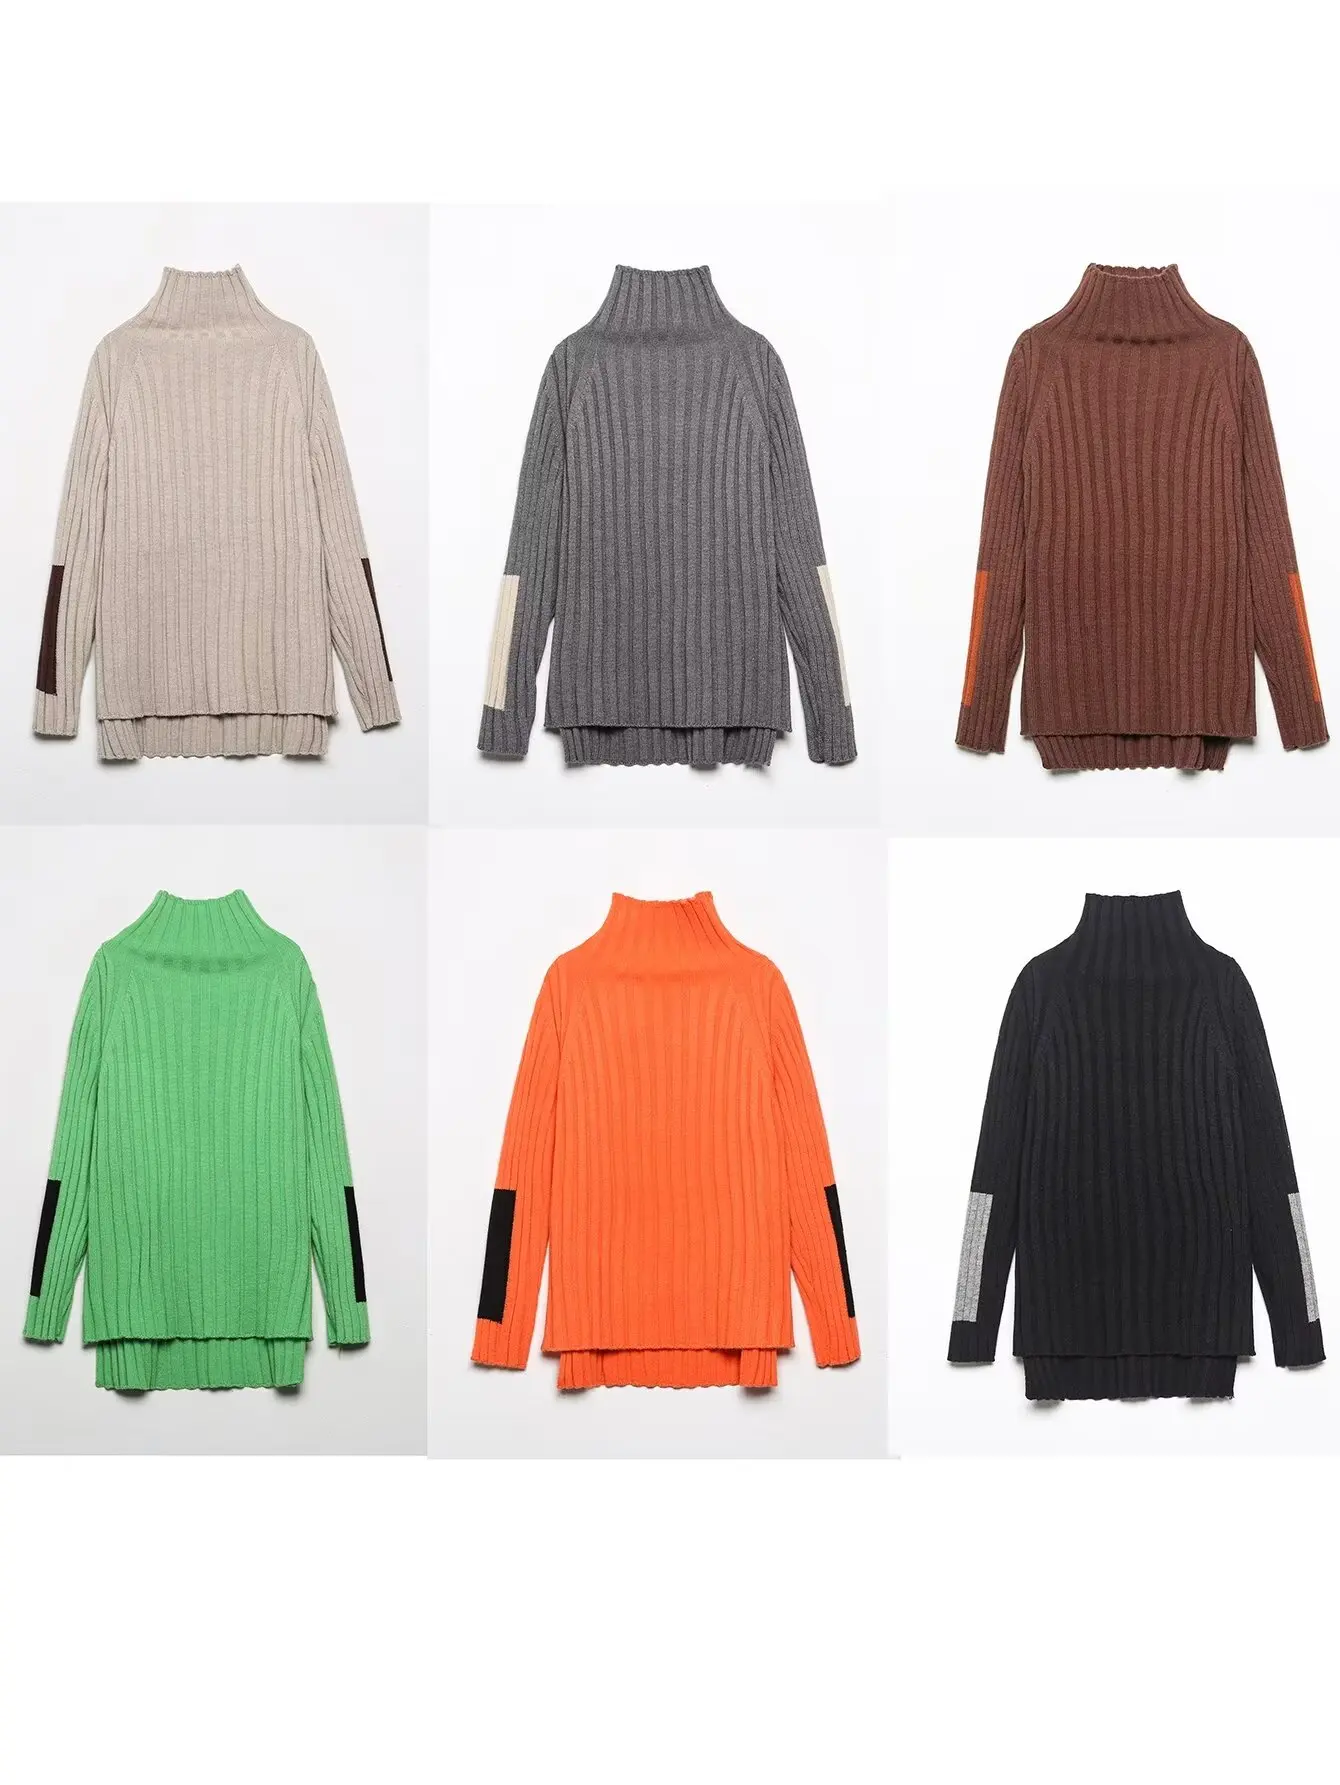 

Women New Fashion Contrast Sleeve Mock Turtleneck Knitted Sweater Retro Long Sleeve All-match Casual Female Pullovers Chic Tops